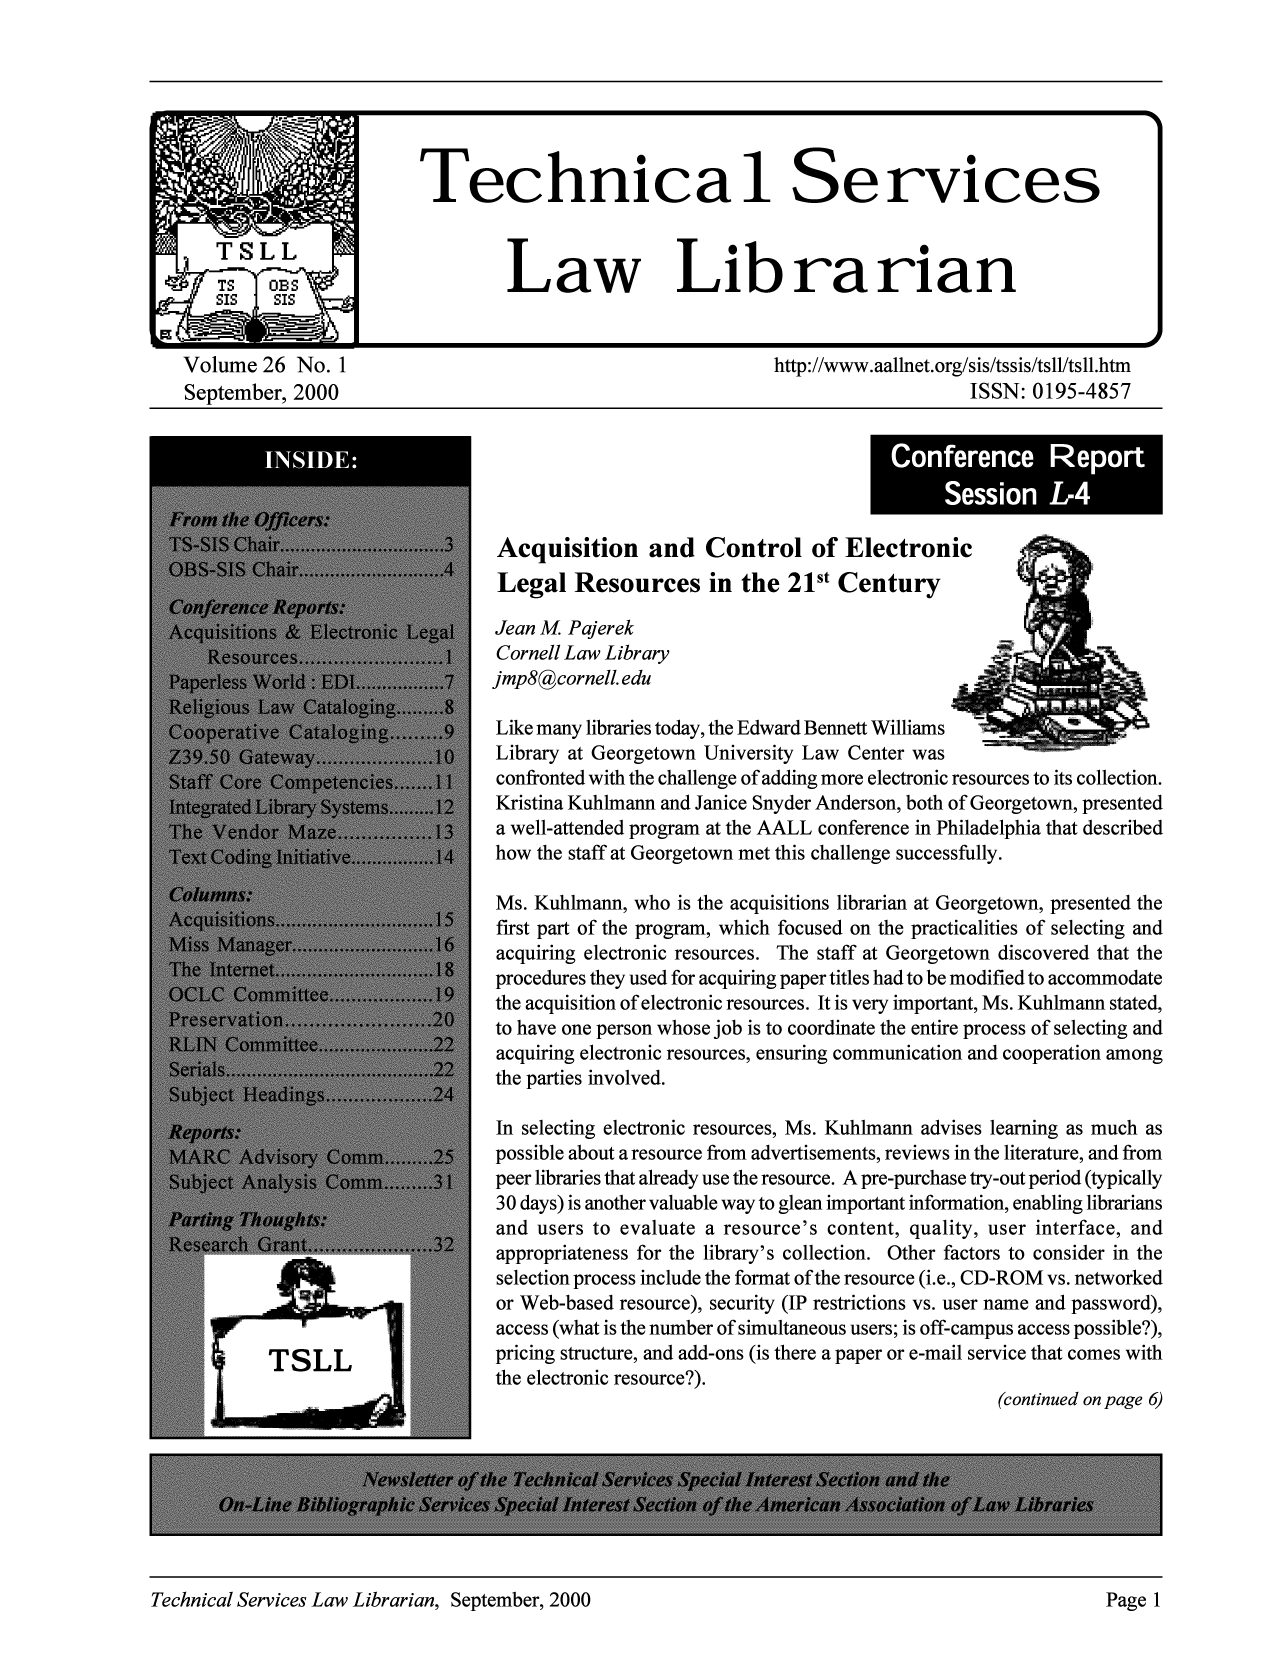 handle is hein.lcc/tsll0026 and id is 1 raw text is: Volume 26 No. 1                                                 http://www.aallnet.org/sis/tssis/tsll/tsll.htm
September, 2000                                                                      ISSN: 0195-4857

Acquisition and Control of Electronic
Legal Resources in the 21st Century
Jean M Pajerek
Cornell Law Library
jmp8@cornell.edu
Like many libraries today, the Edward Bennett Williams     all.
Library at Georgetown University Law Center was
confronted with the challenge of adding more electronic resources to its collection.
Kristina Kuhlmann and Janice Snyder Anderson, both of Georgetown, presented
a well-attended program at the AALL conference in Philadelphia that described
how the staff at Georgetown met this challenge successfully.
Ms. Kuhlmann, who is the acquisitions librarian at Georgetown, presented the
first part of the program, which focused on the practicalities of selecting and
acquiring electronic resources. The staff at Georgetown discovered that the
procedures they used for acquiring paper titles had to be modified to accommodate
the acquisition of electronic resources. It is very important, Ms. Kuhlmann stated,
to have one person whose job is to coordinate the entire process of selecting and
acquiring electronic resources, ensuring communication and cooperation among
the parties involved.
In selecting electronic resources, Ms. Kuhlmann advises learning as much as
possible about a resource from advertisements, reviews in the literature, and from
peer libraries that already use the resource. A pre-purchase try-out period (typically
30 days) is another valuable way to glean important information, enabling librarians
and users to evaluate a resource's content, quality, user interface, and
appropriateness for the library's collection. Other factors to consider in the
selection process include the format of the resource (i.e., CD-ROM vs. networked
or Web-based resource), security (IP restrictions vs. user name and password),
access (what is the number of simultaneous users; is off-campus access possible?),
pricing structure, and add-ons (is there a paper or e-mail service that comes with
the electronic resource?).
(continued on page 6)

Technical Services Law Librarian, September, 2000                                                Page 1

Conference Report
Session L4

Technical Services Law Librarian, September, 2000

Page I


